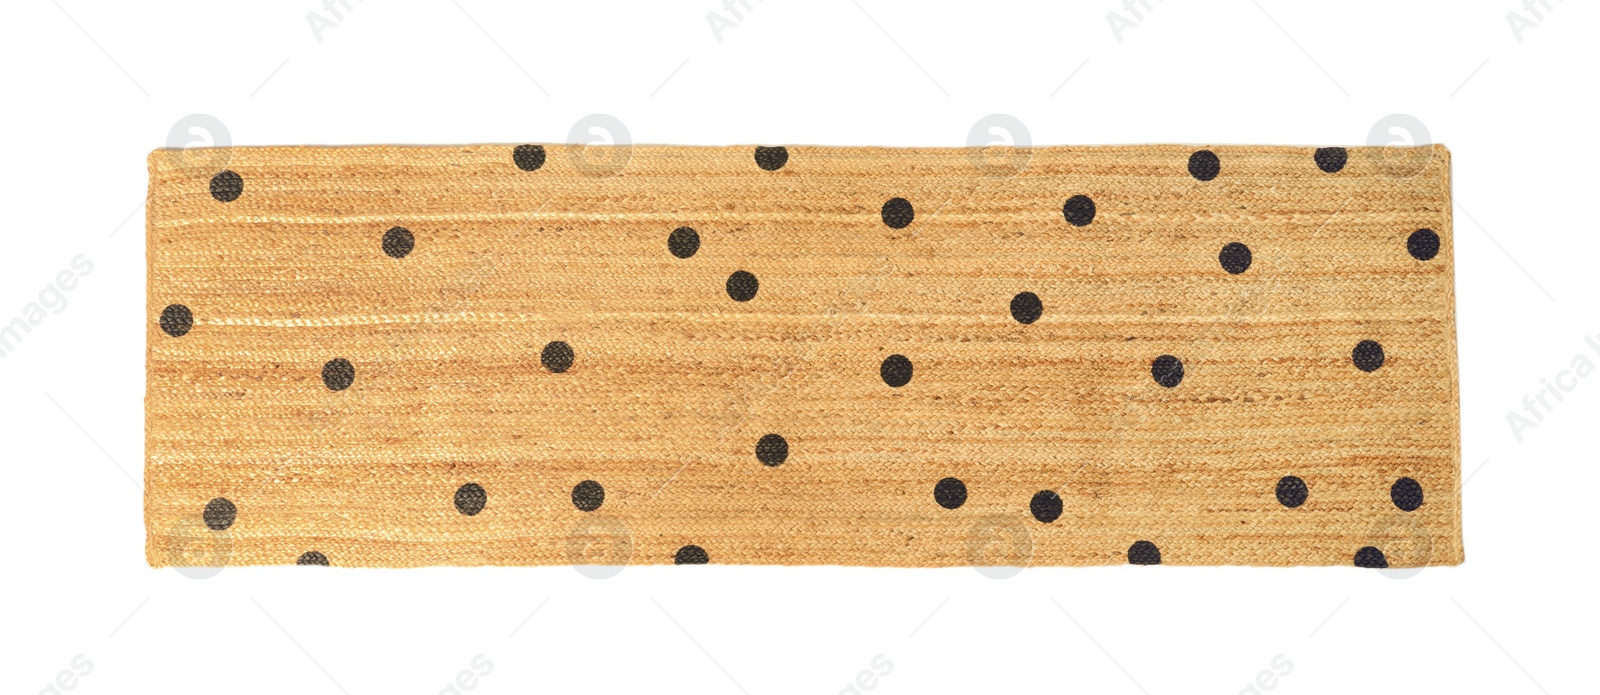 Photo of Rug with polka dot pattern isolated on white, top view